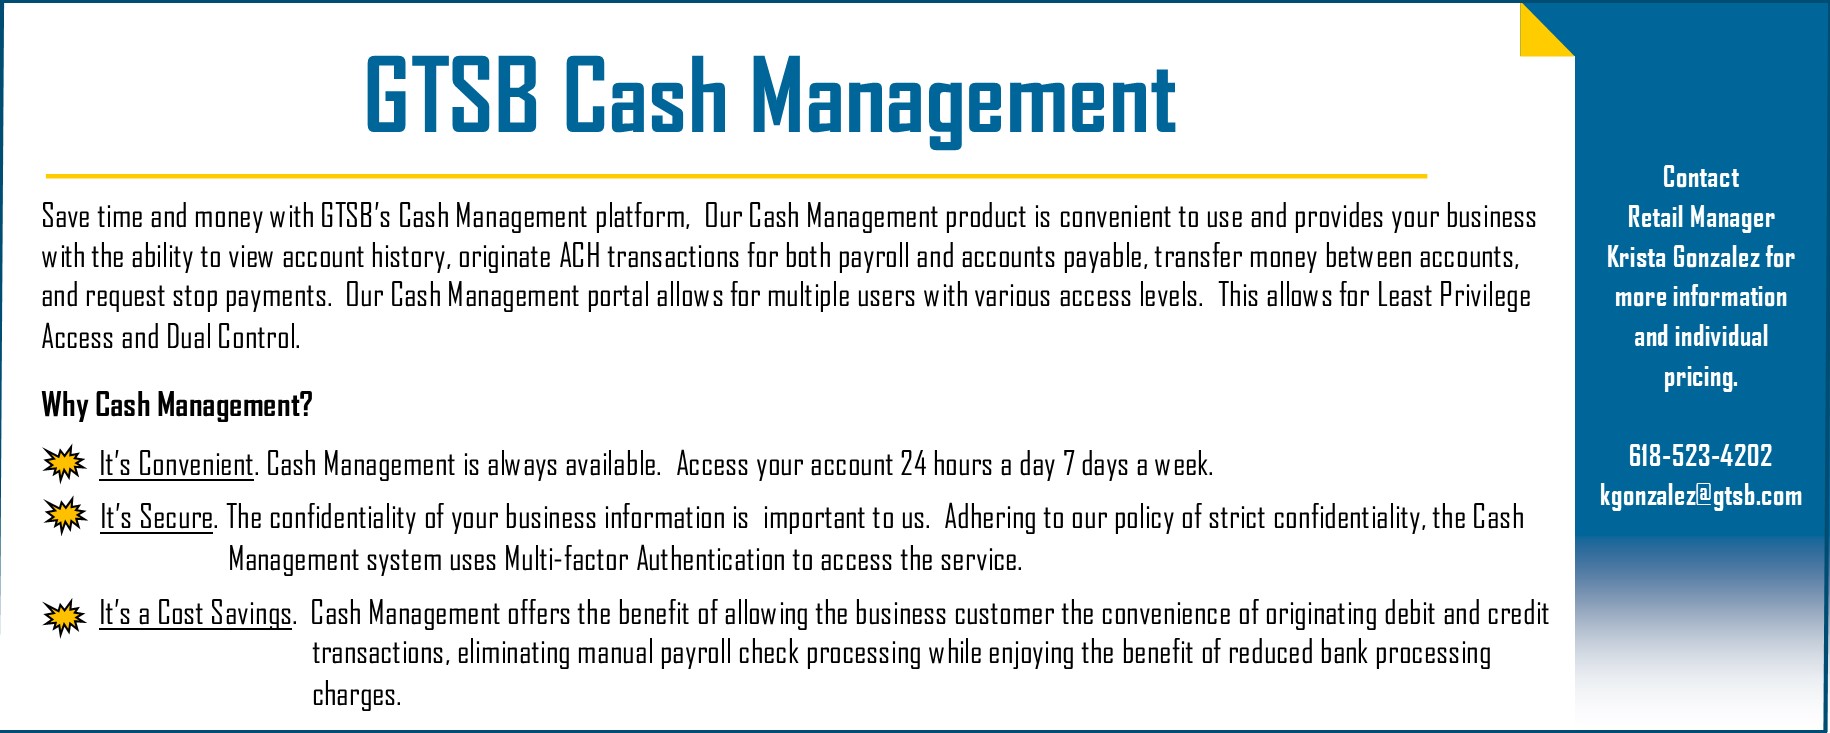 Contact us about GTSB Cash Management services for your business.